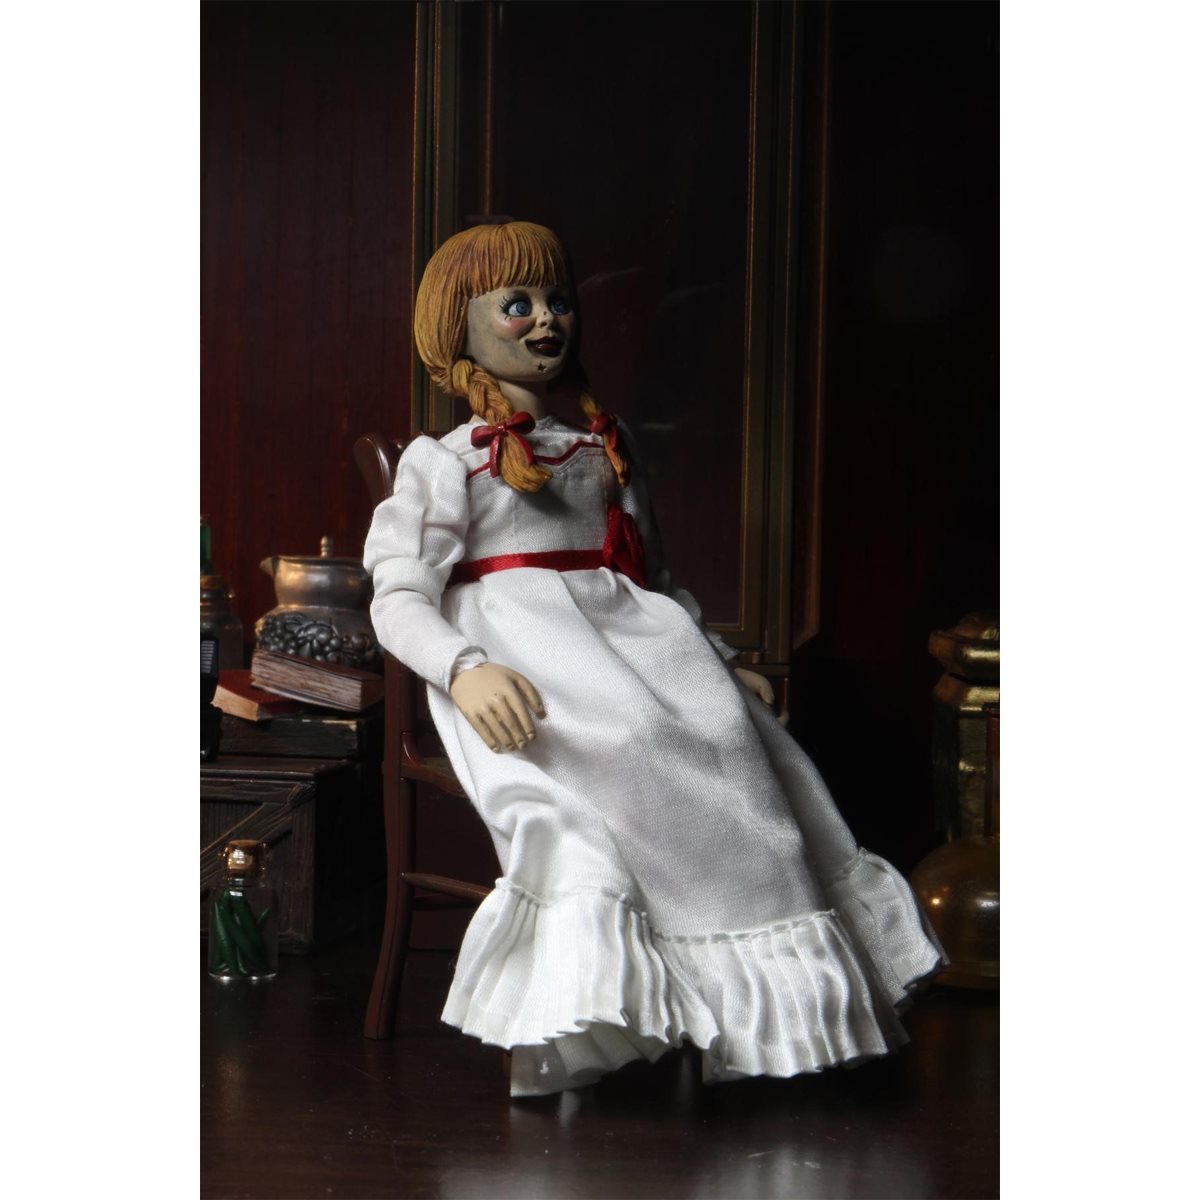 the conjuring action figure